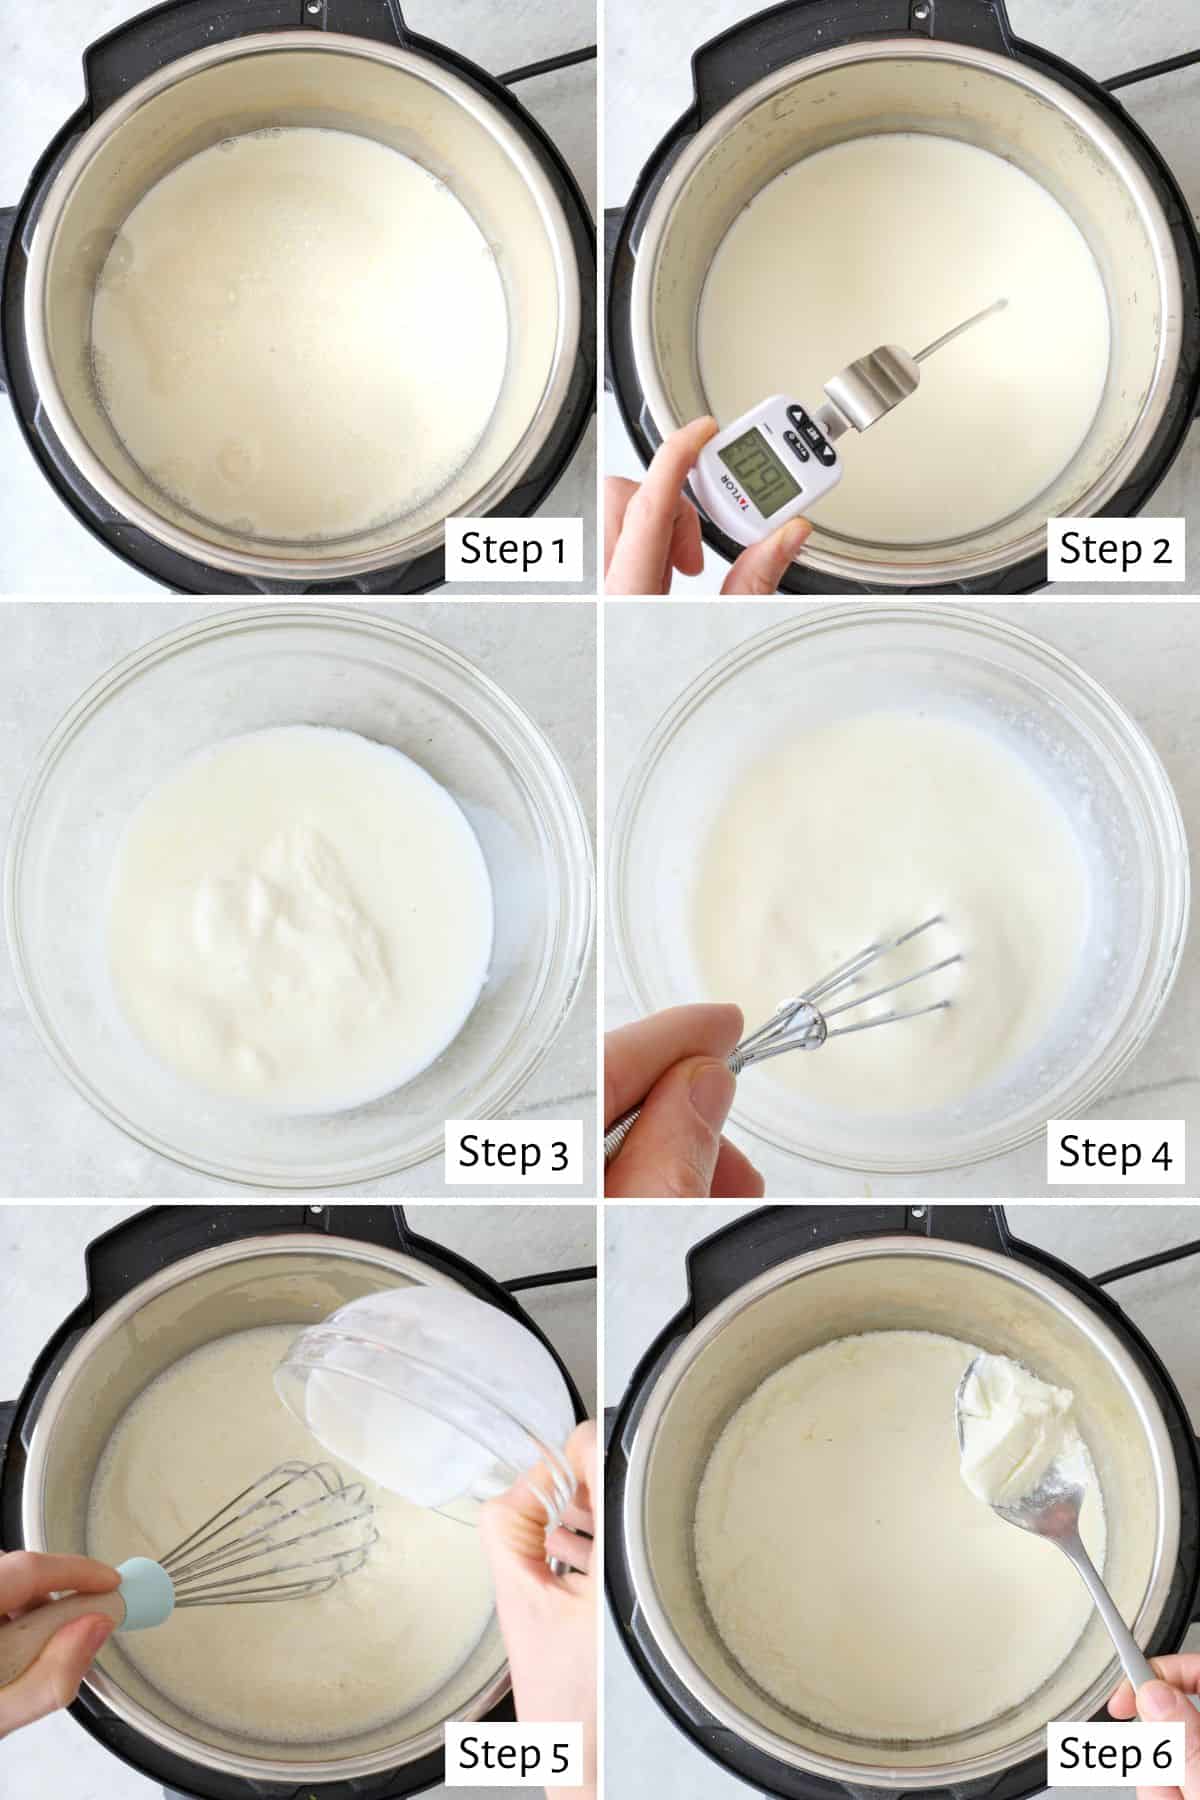 6-image- collage making yogurt: 1 - Milk in the Instant Pot; 2 - After milk has gently boiled with thermometer inside to show temperature; 3 - Yogurt in a small bowl with a small amount of cooled milk before mixing; 4 - Mixing yogurt and milk; 5 - Whisking yogurt into cooled milk in the Instant Pot; 6 - Spoon skimming some yogurt from the top after yogurt has fermented for 8 hours.